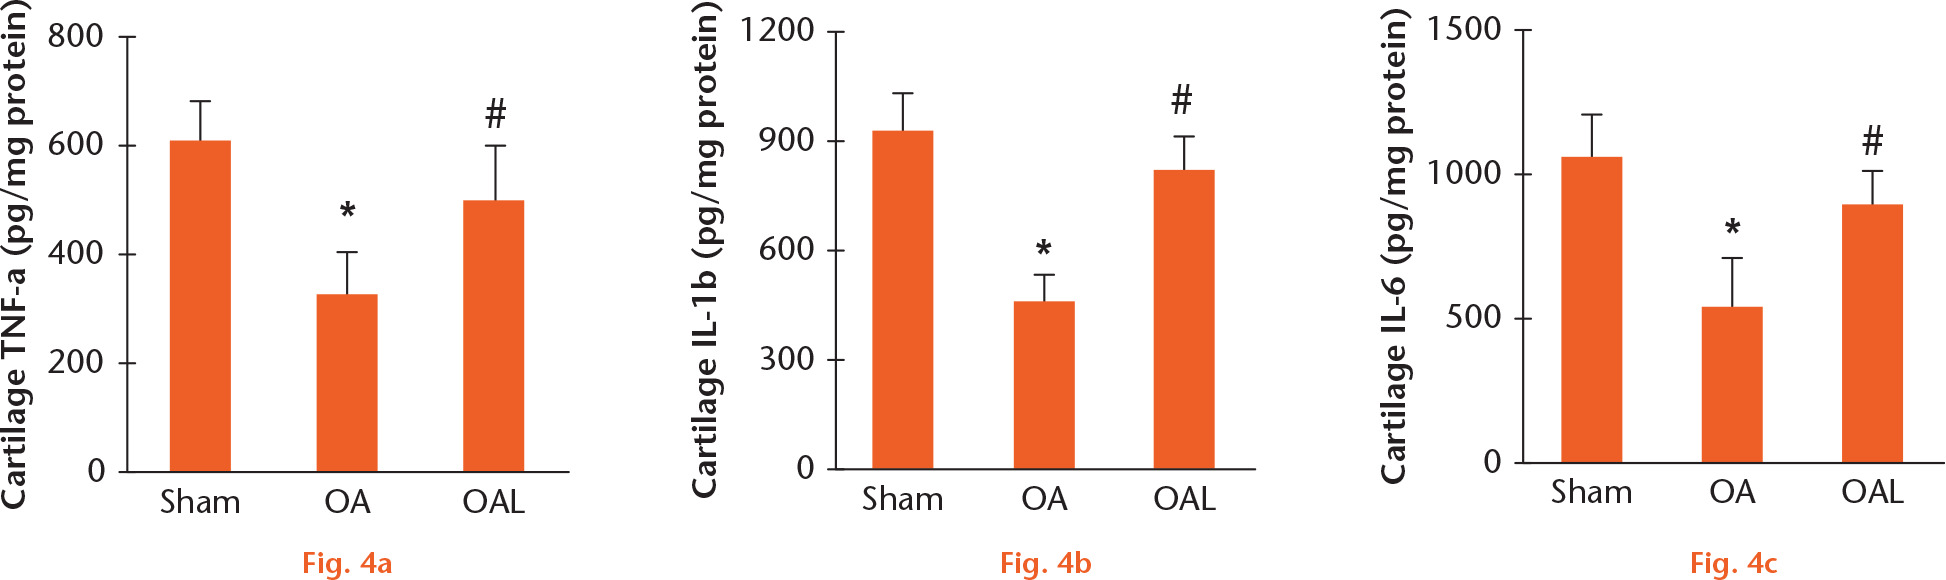  
            The role on nitric oxide on cartilage pro-inflammatory cytokine production in rats. Rats were divided into three groups of five. Group I (sham group), rats received the sham operation only; Group II (OA group), rats received the meniscectomy operation only; and Group III (OAL group), rats received the meniscectomy operation and L-NAME (20 mg/kg/d for 14 days, orally). Cartilage pro-inflammatory cytokines including TNF-α (Α), IL-1β (Β), and IL-6 (C) were assessed 14 days after meniscectomy from each group, respectively. Data are expressed as means and standard deviation. *p < 0.05 compared with Sham group (Group I). #p < 0.05 compared with OA group (Group II).
          